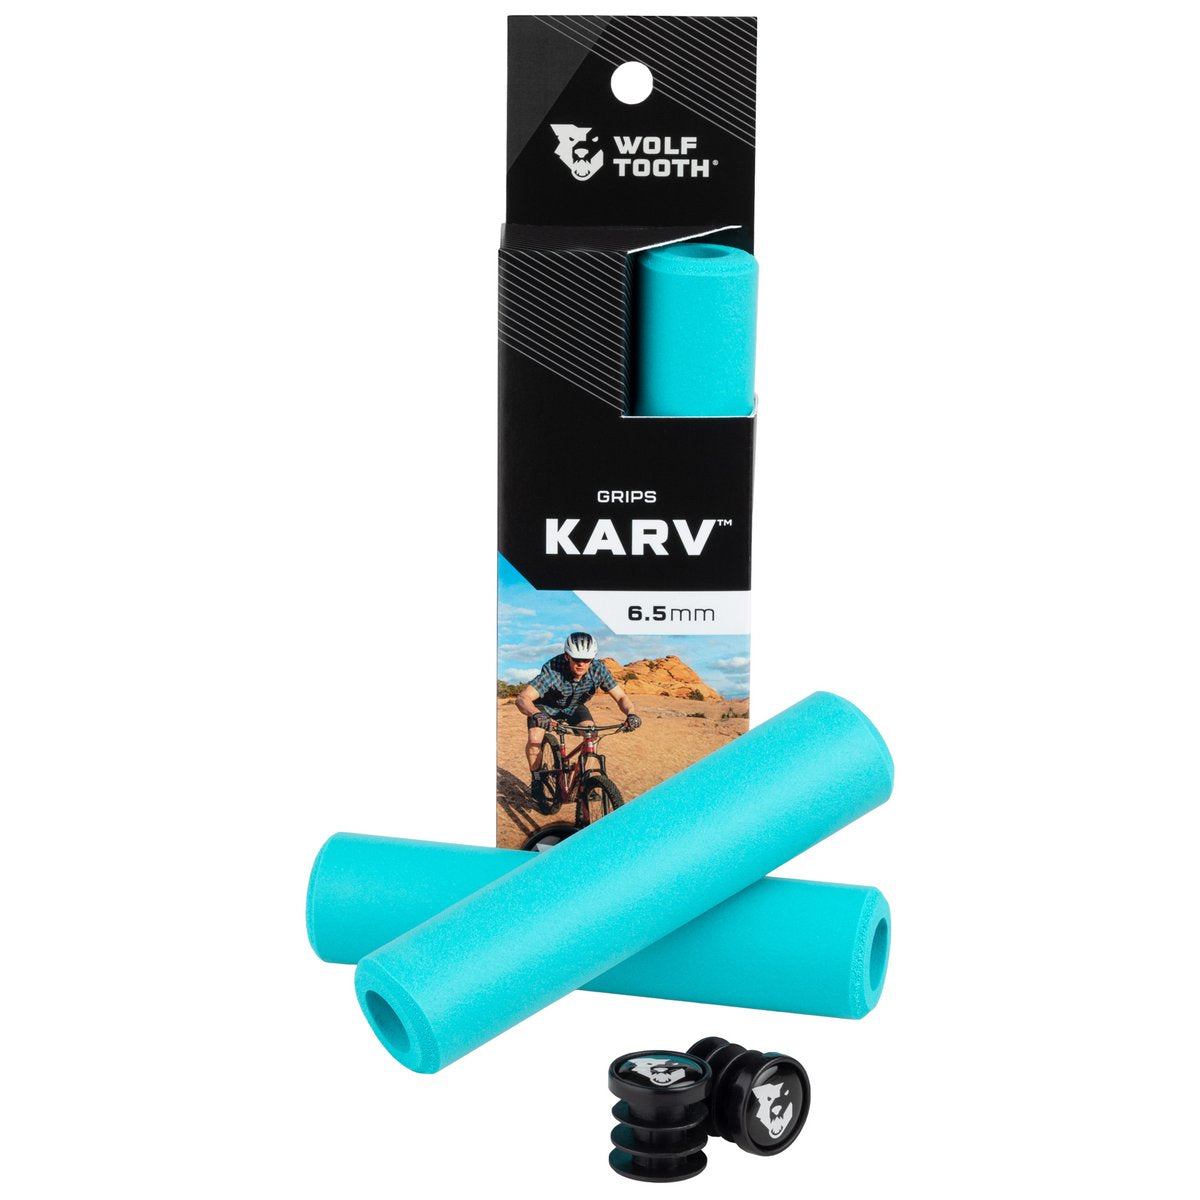 Grips Puños Wolf Tooth Karv